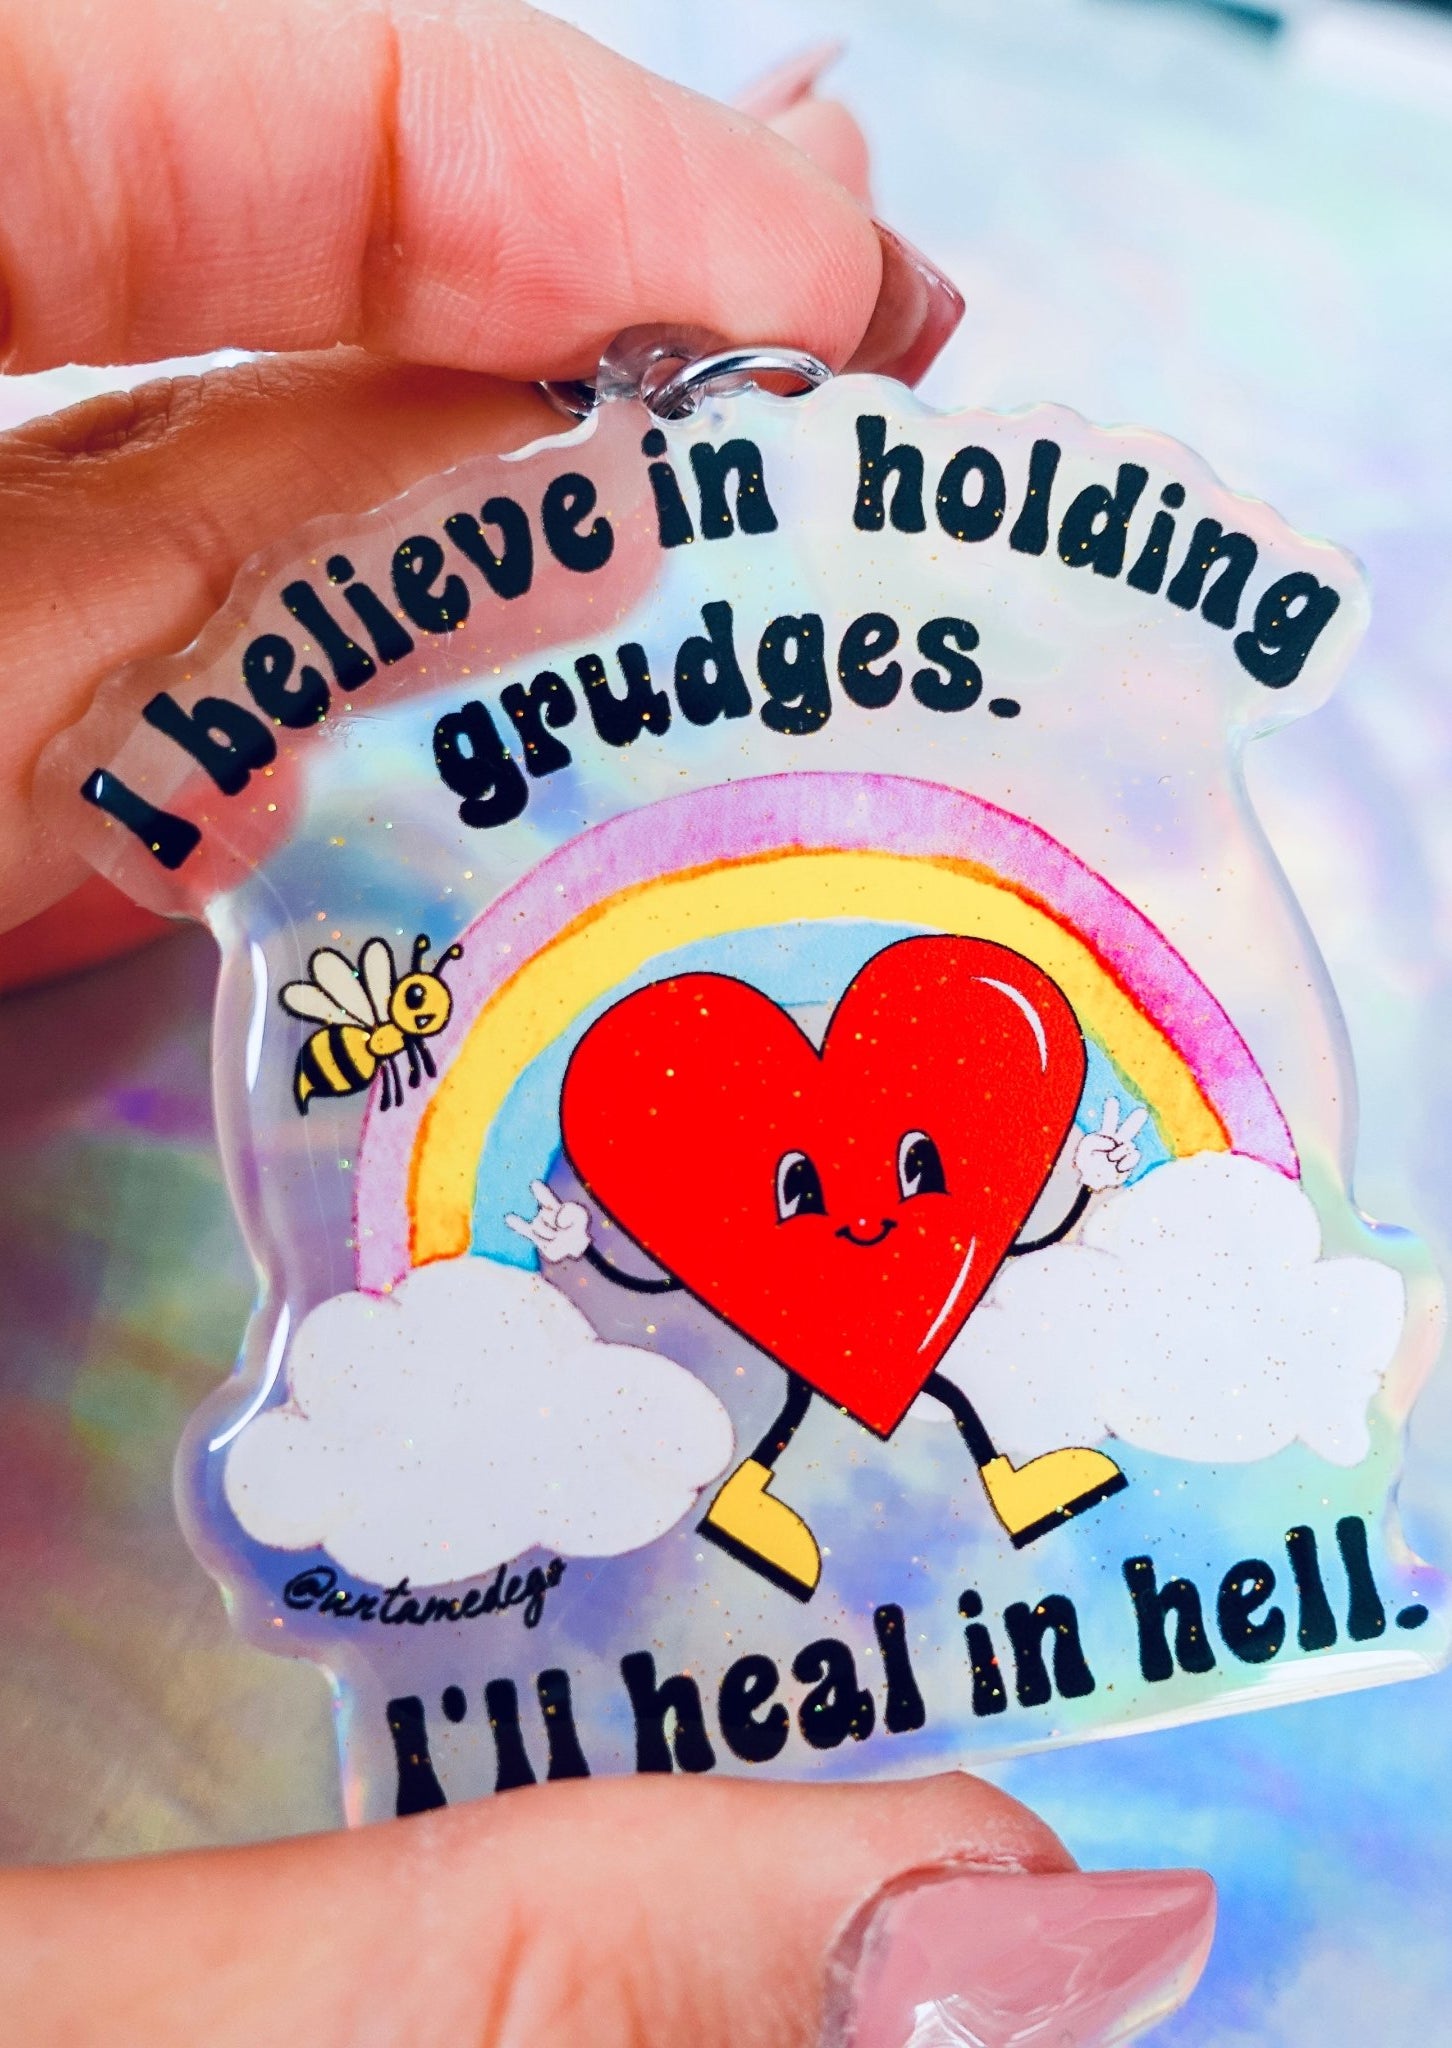 I Believe In Holding Grudges I'll Heal In Hell Keychain - UntamedEgo LLC.